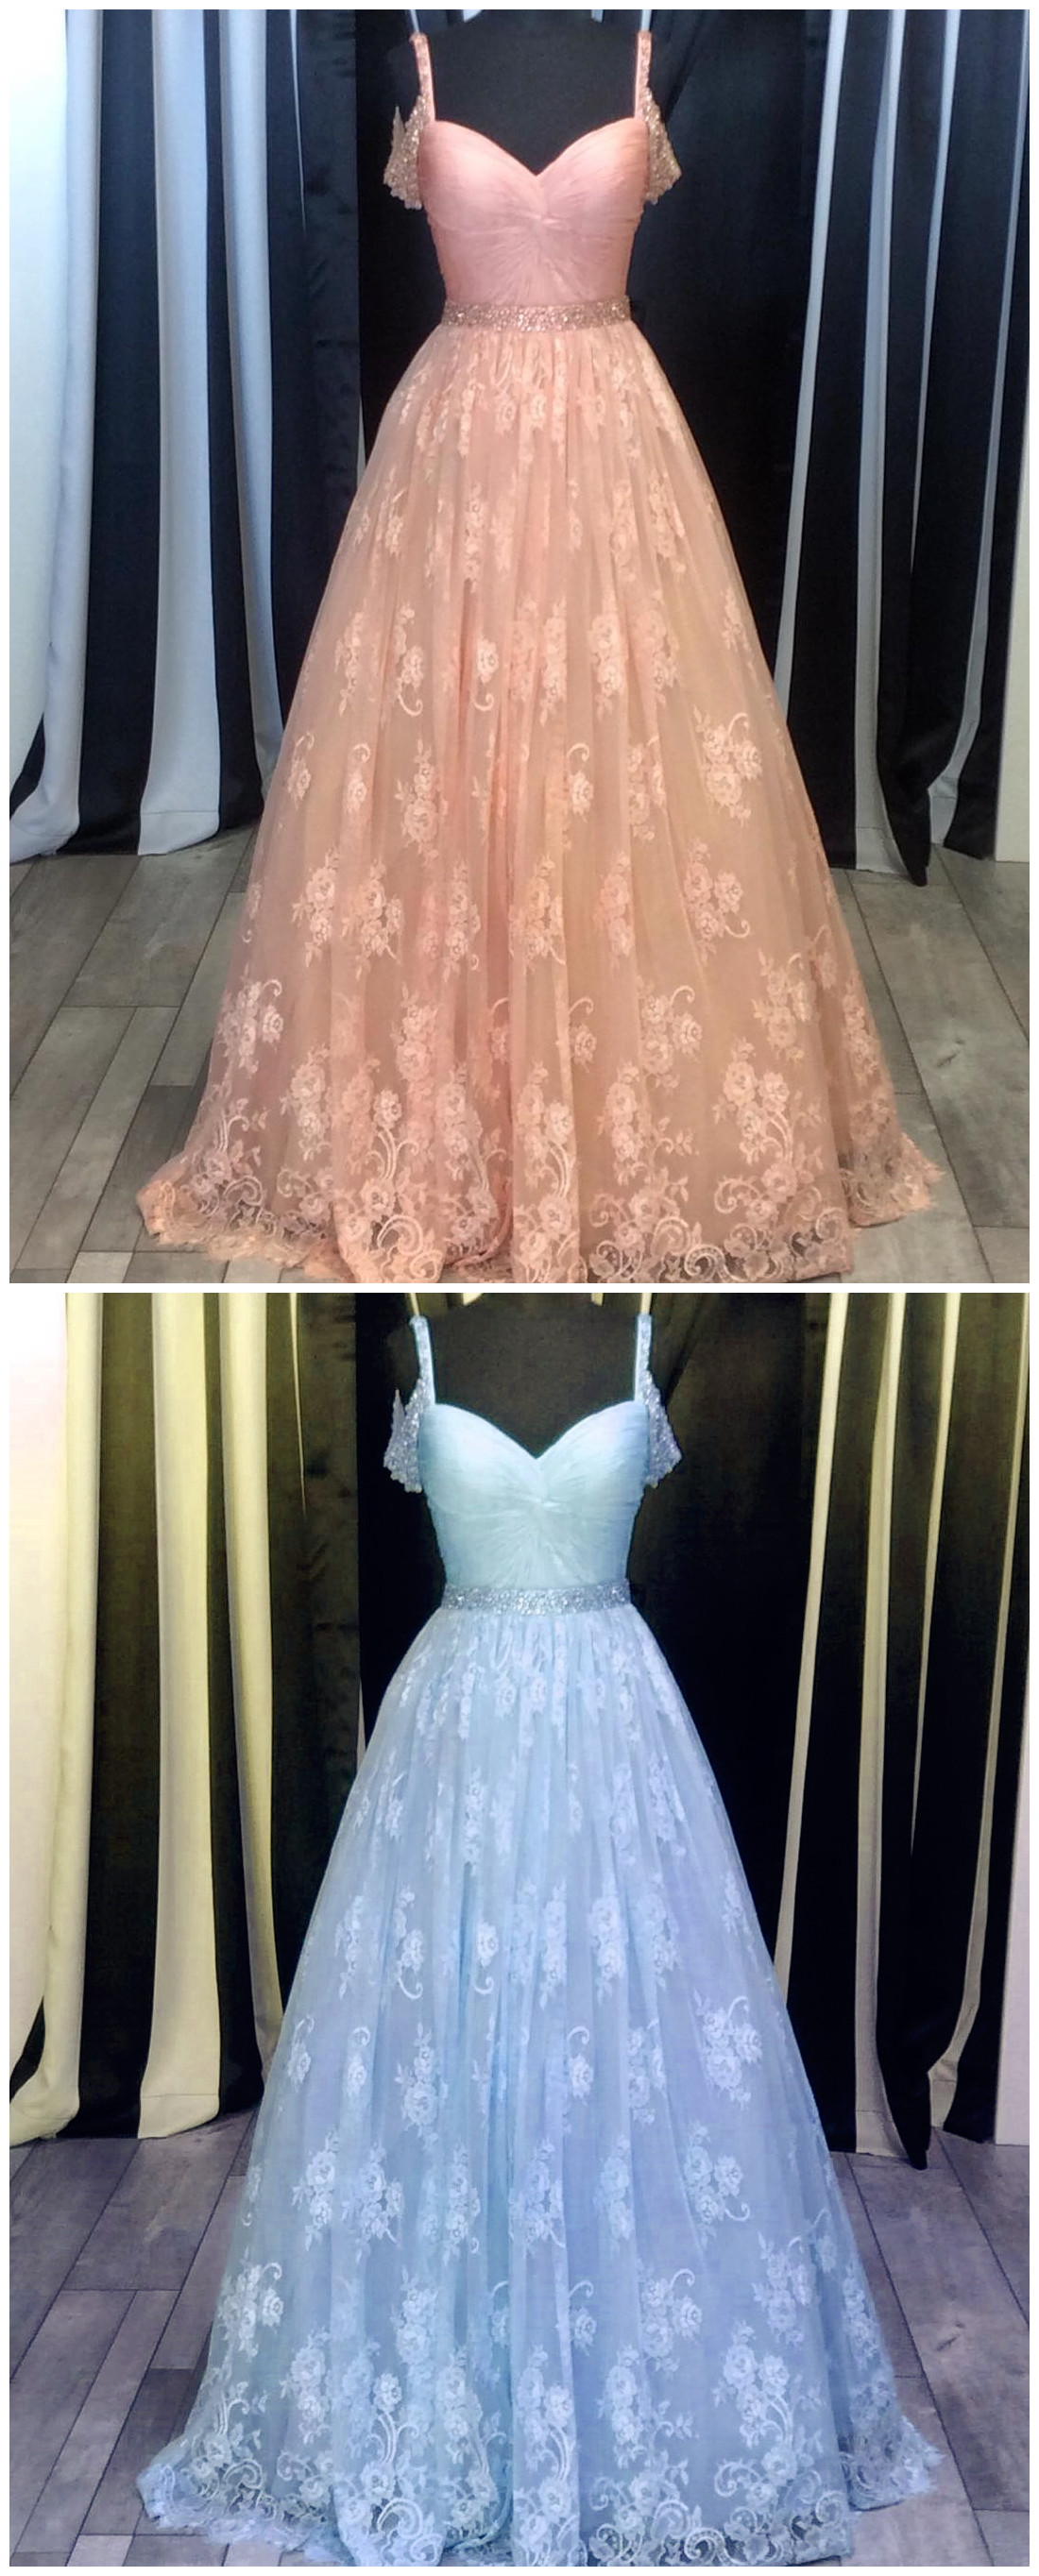 Prom Dress,modest Prom Dress,blush Pink Lace Ball Gowns Prom Dress 2017 Women's Sweetheart Formal Dress With Beaded Straps